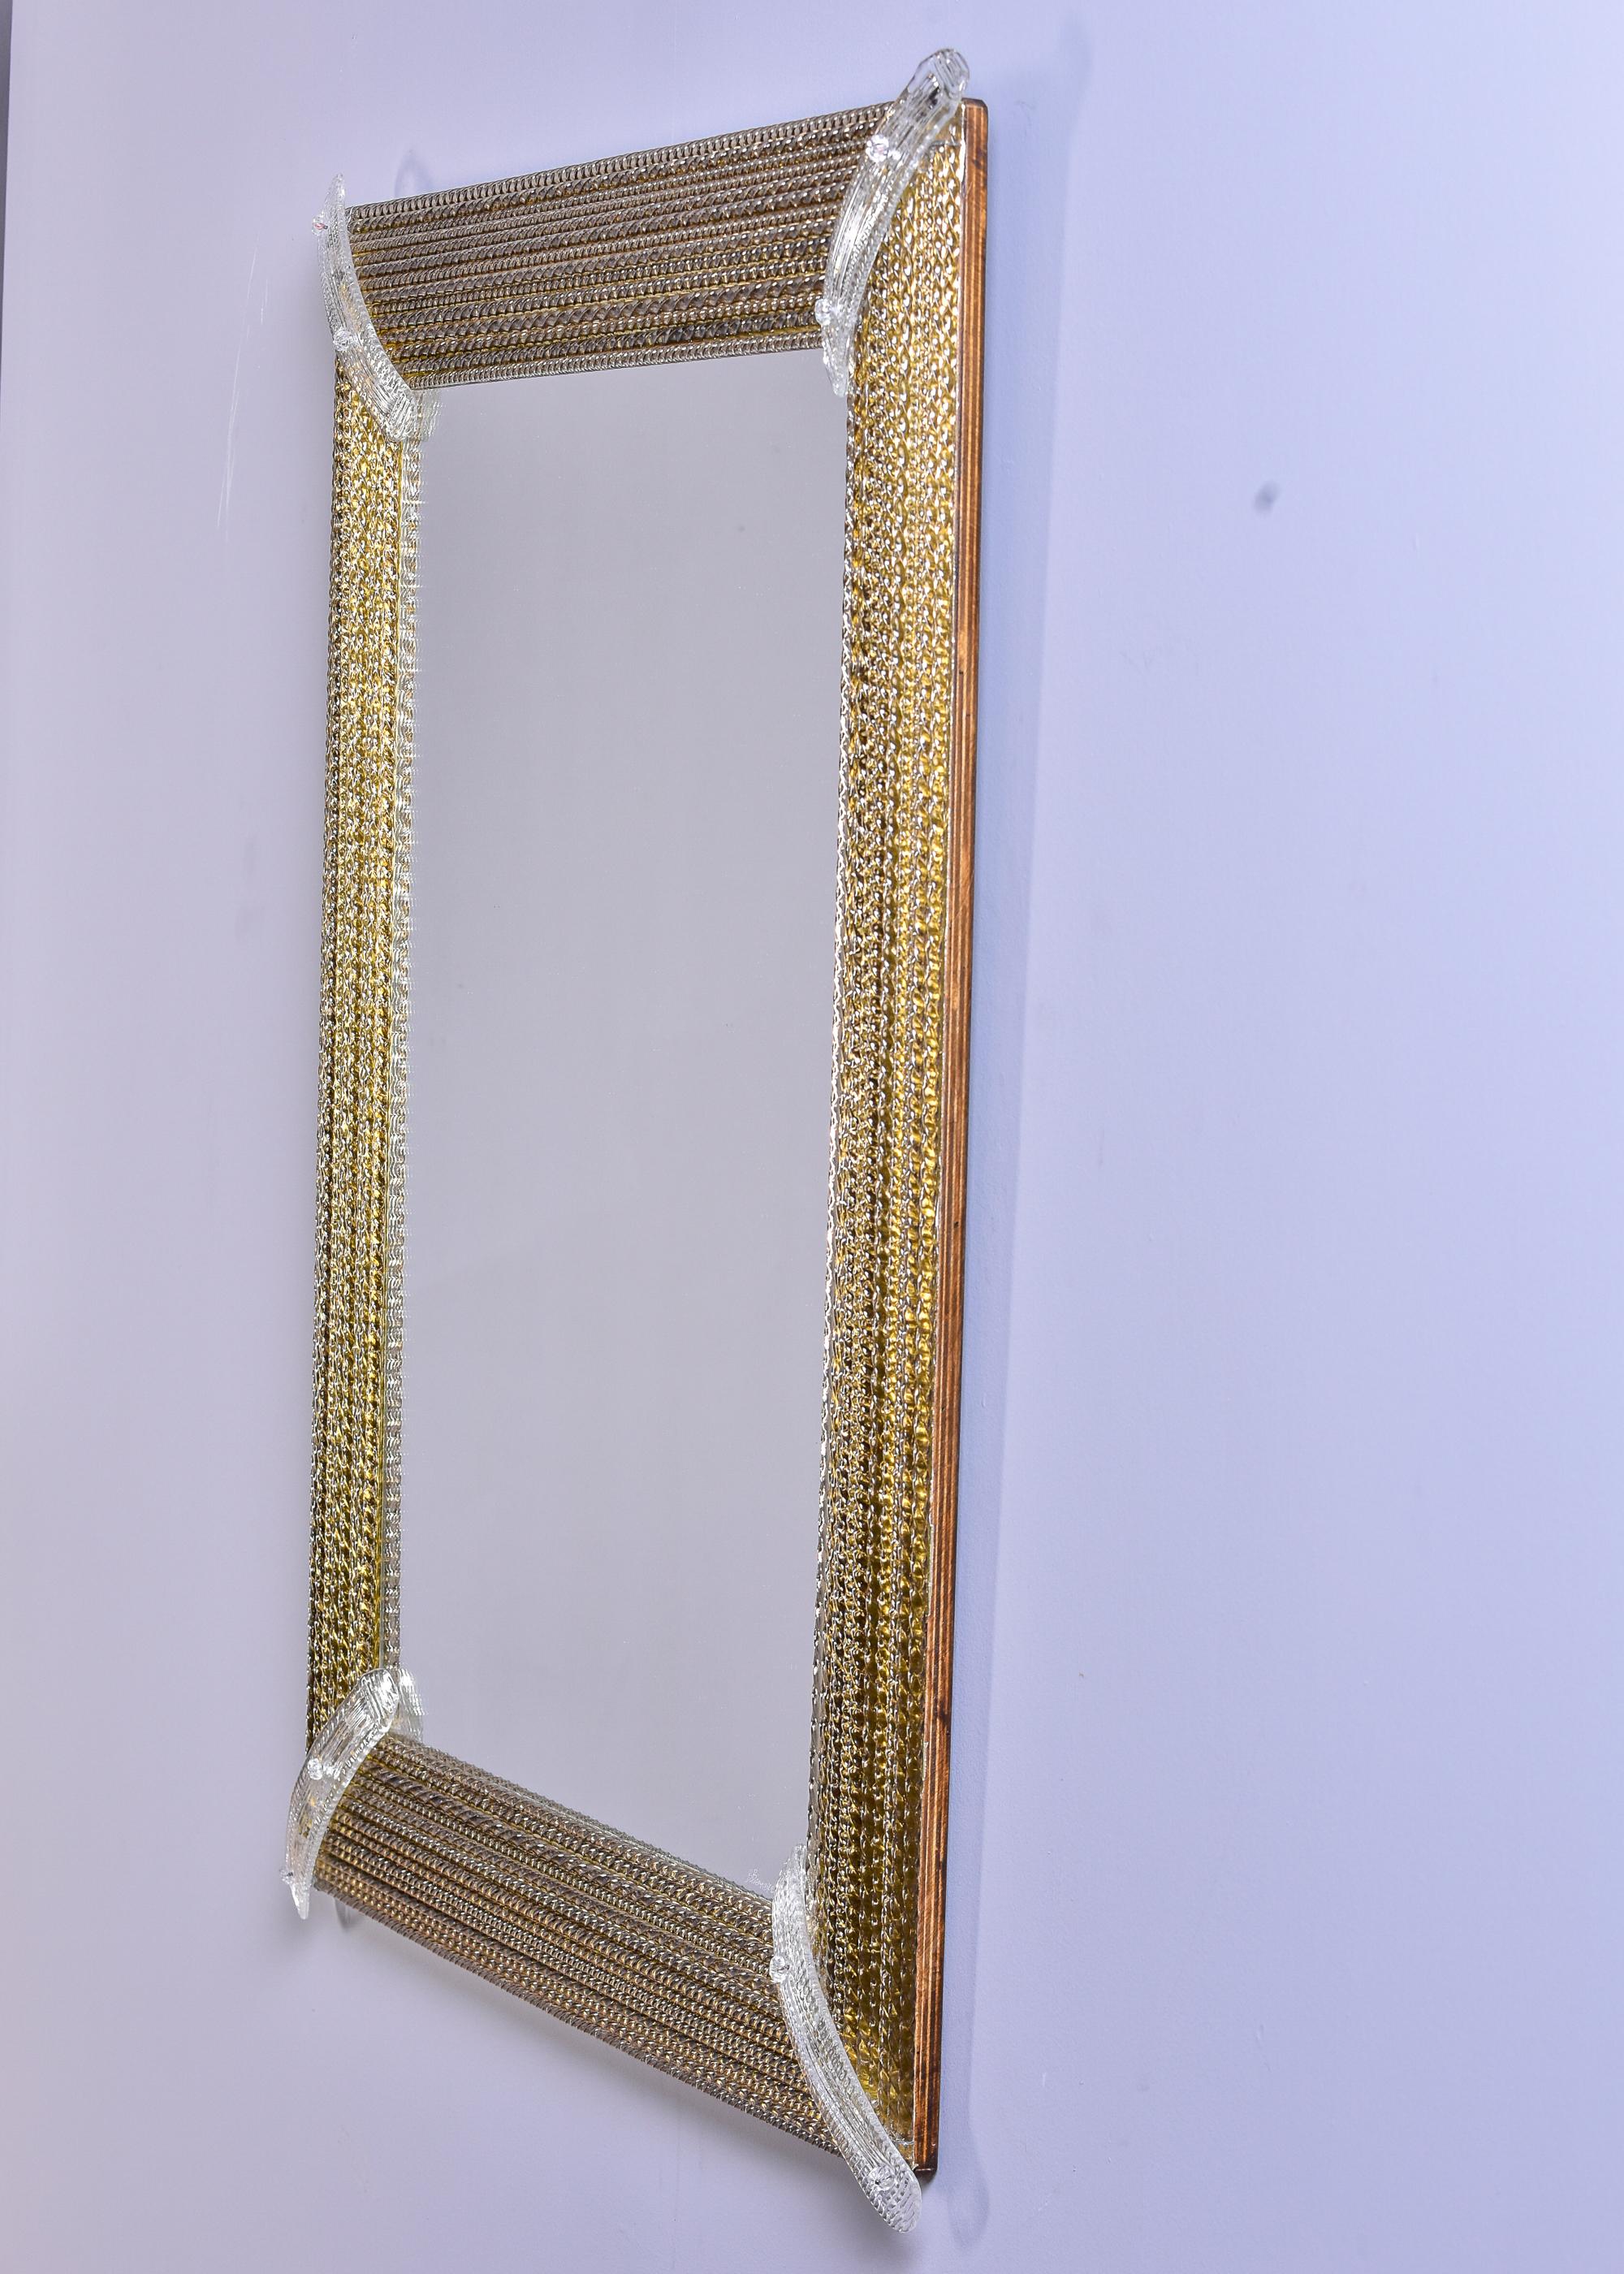 Signed Barovier & Toso Venetian Murano Glass Mirror with Gold Infused Frame 4